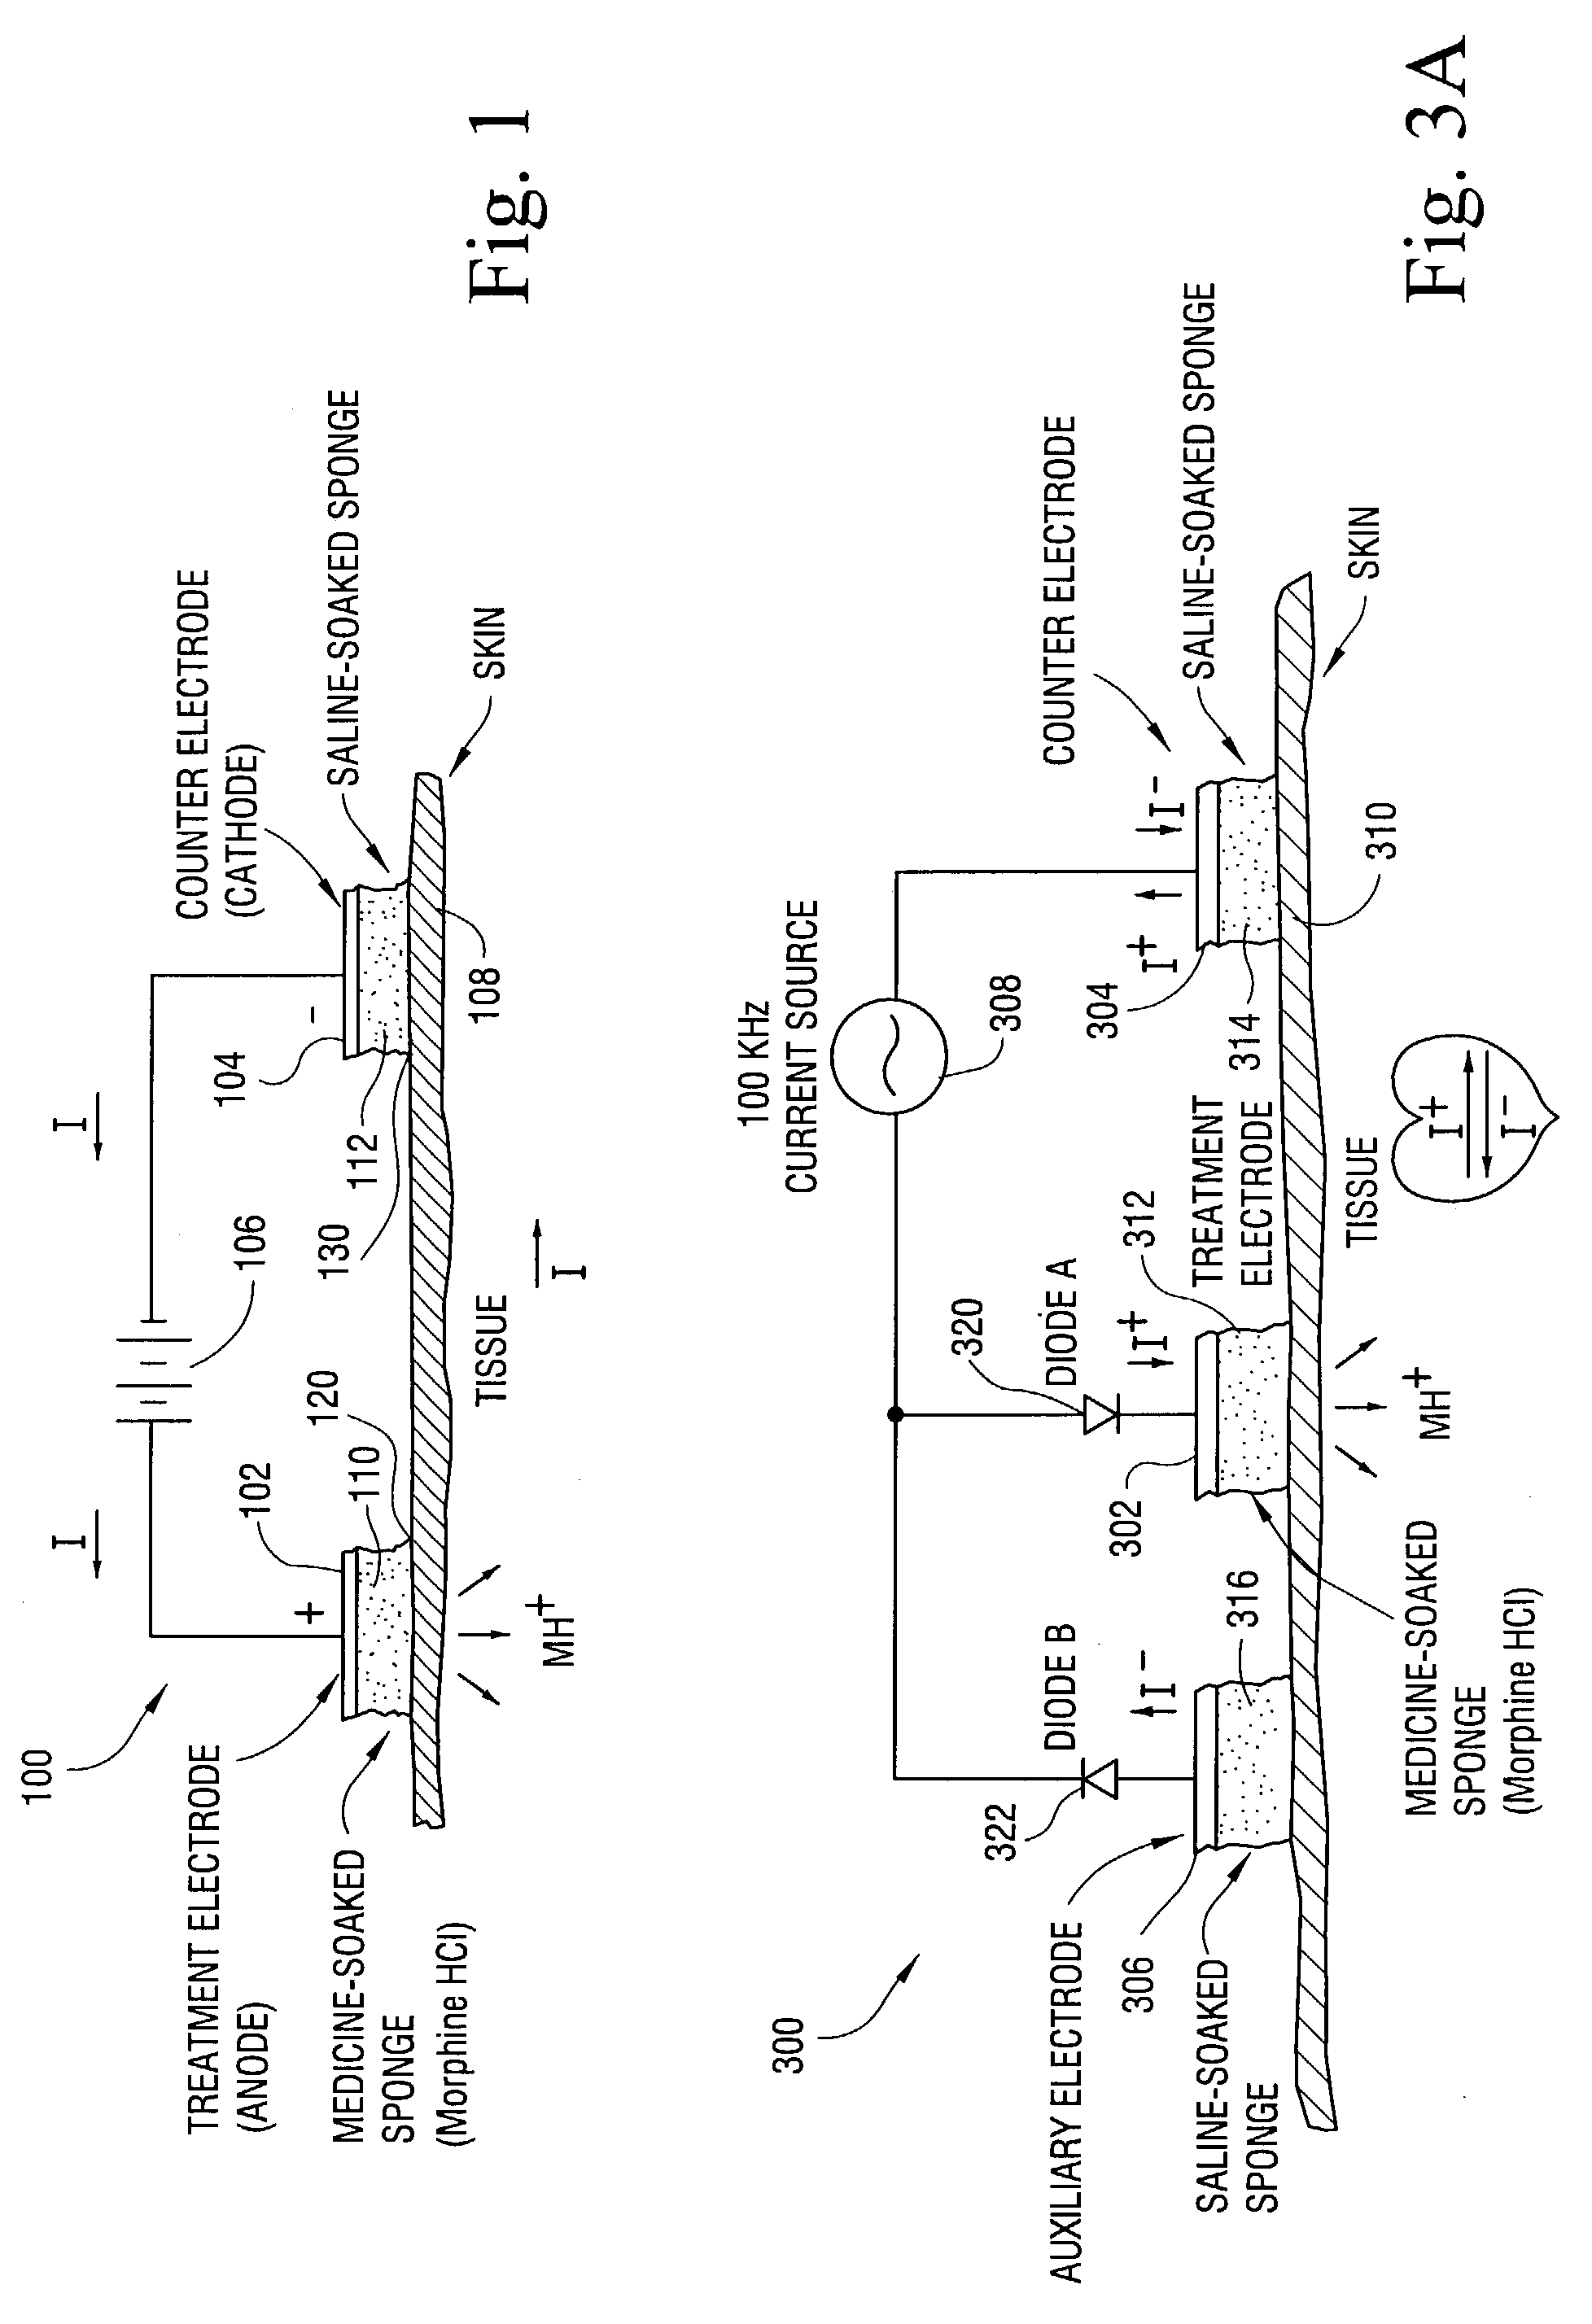 Systems and methods for electrokinetic delivery of a substance